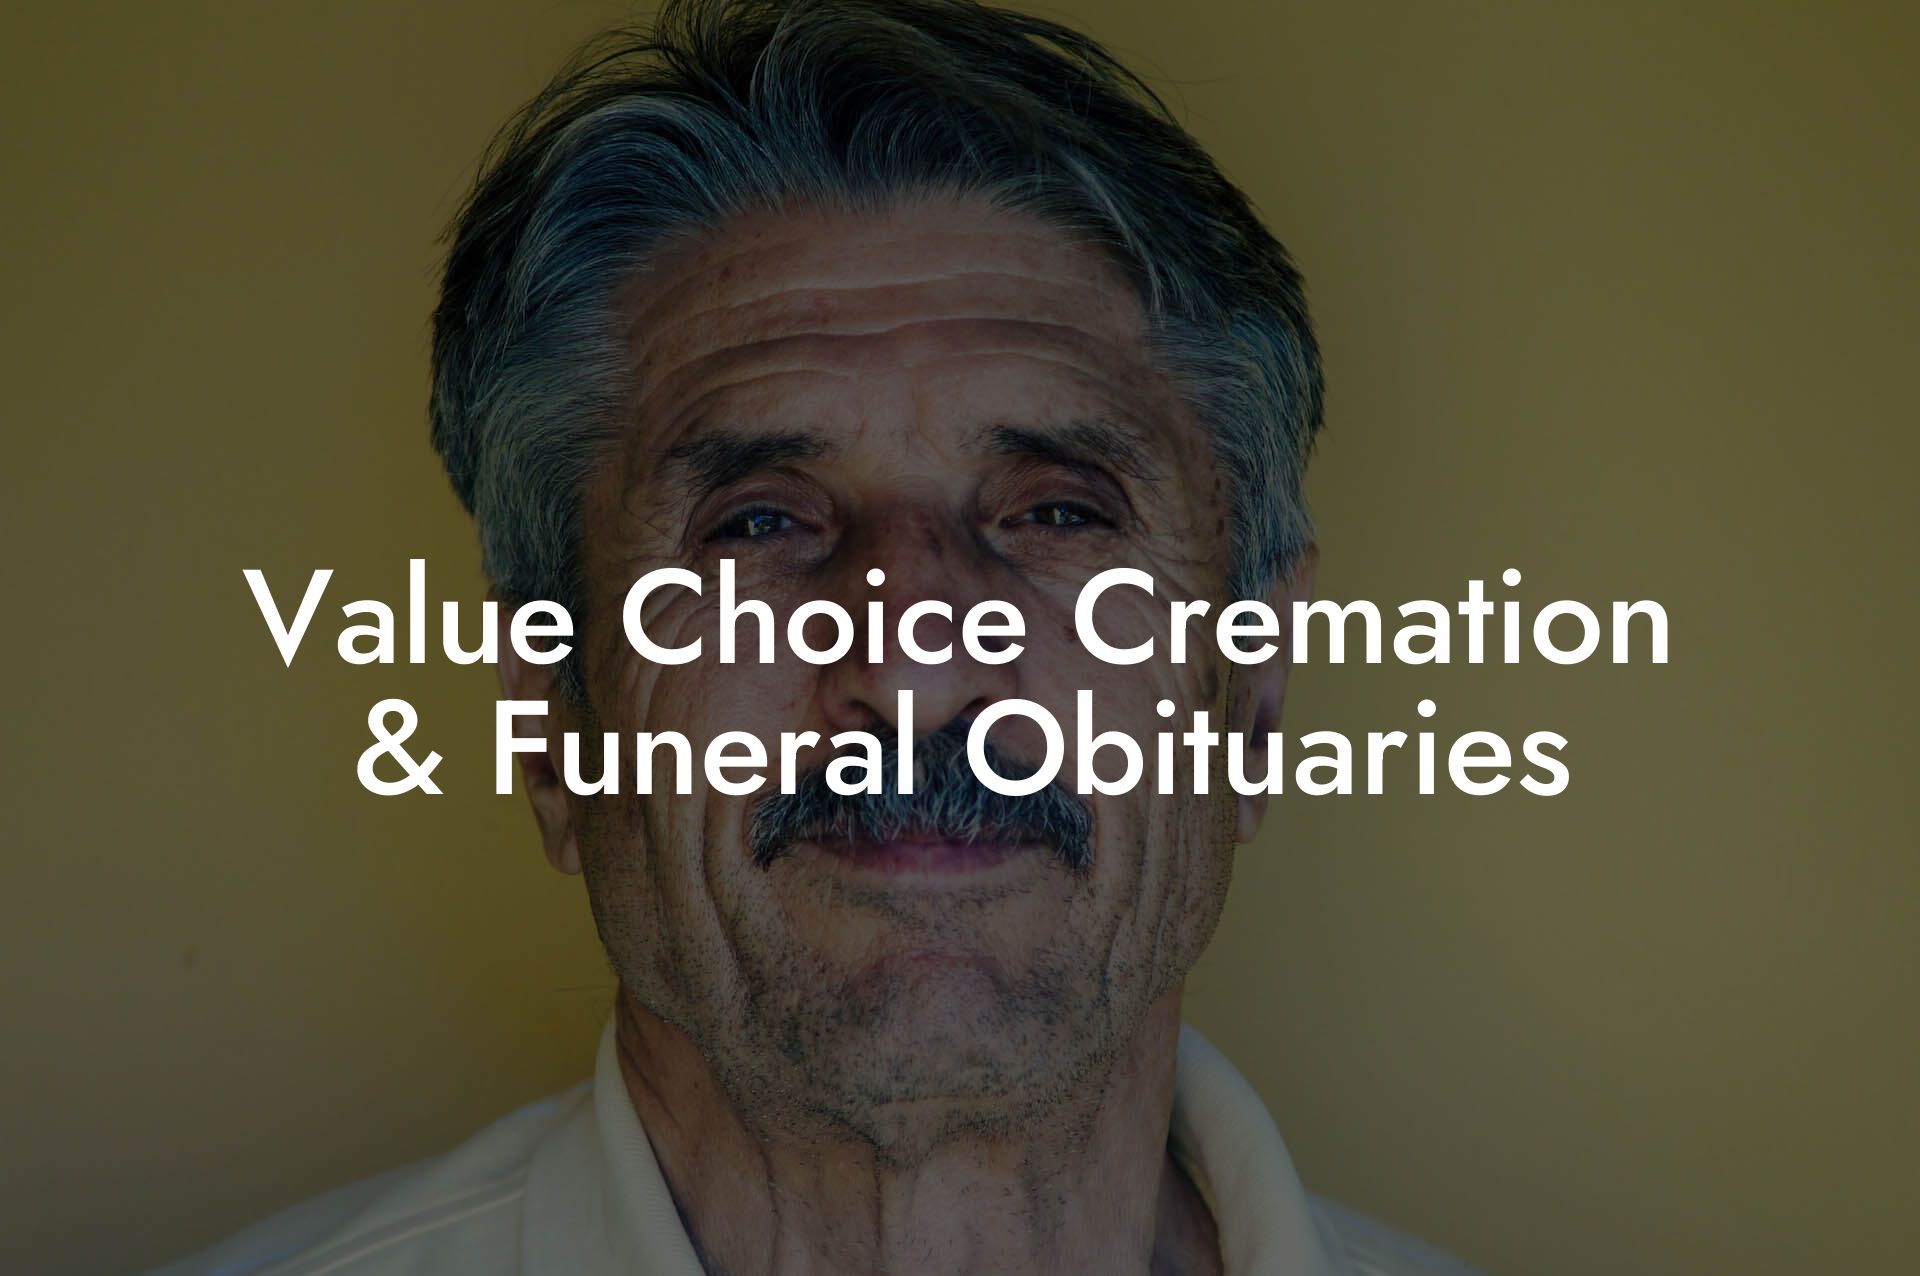 Value Choice Cremation & Funeral Obituaries